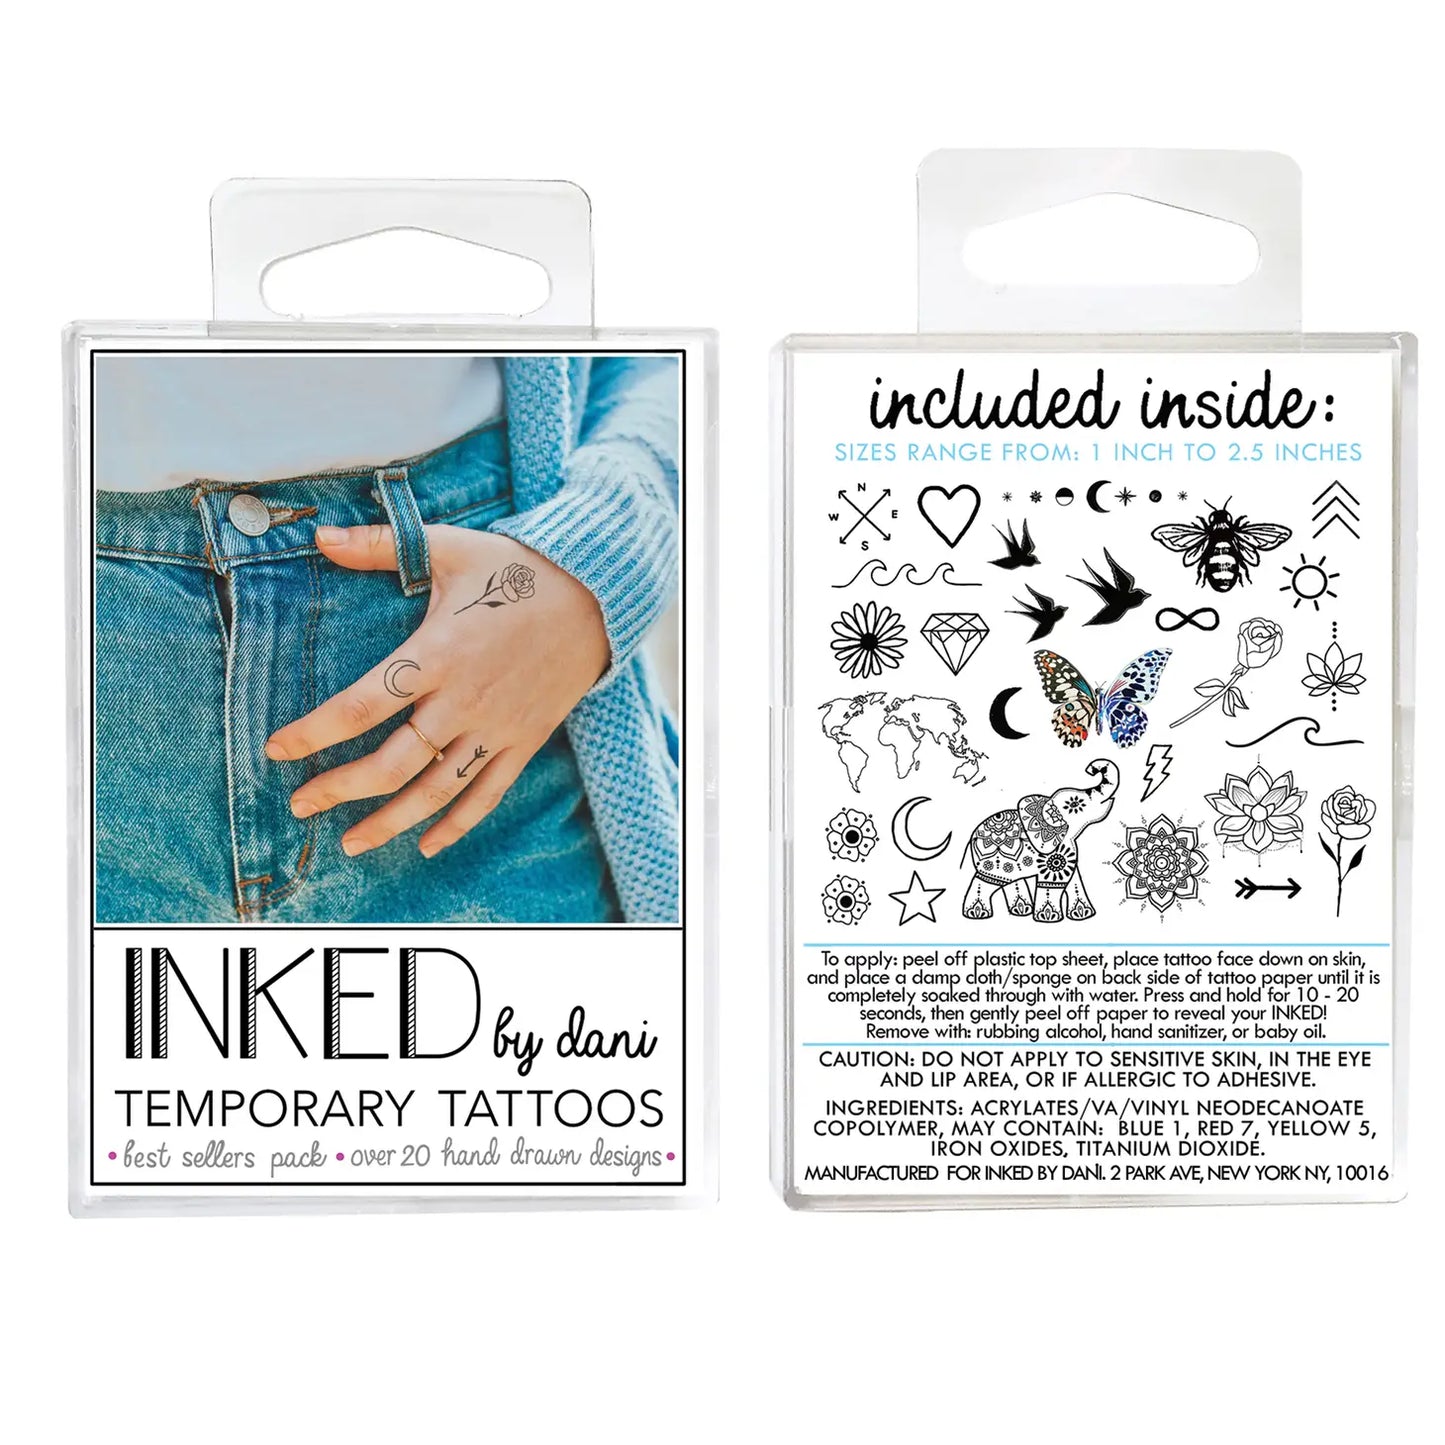 BEST SELLERS TEMPORARY TATTOO PACK